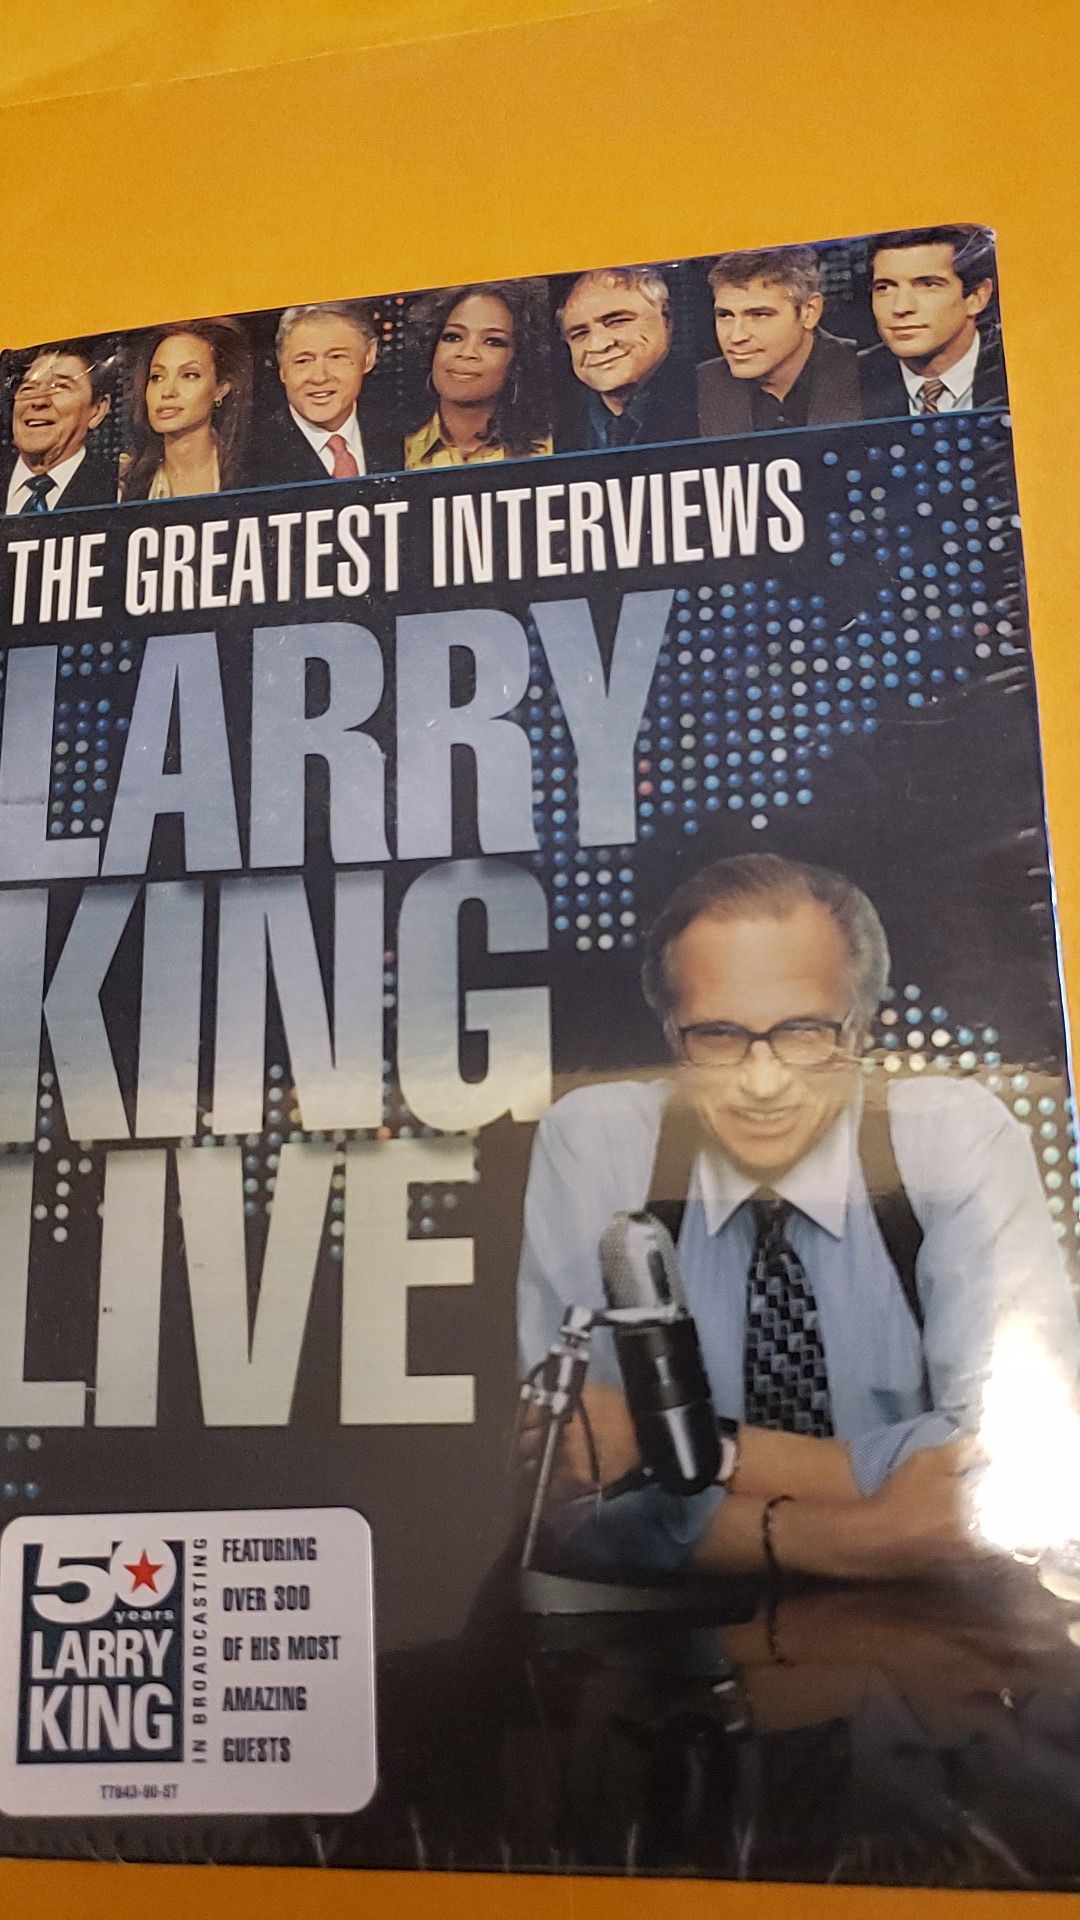 New Larry King Live - The Greatest Interviews